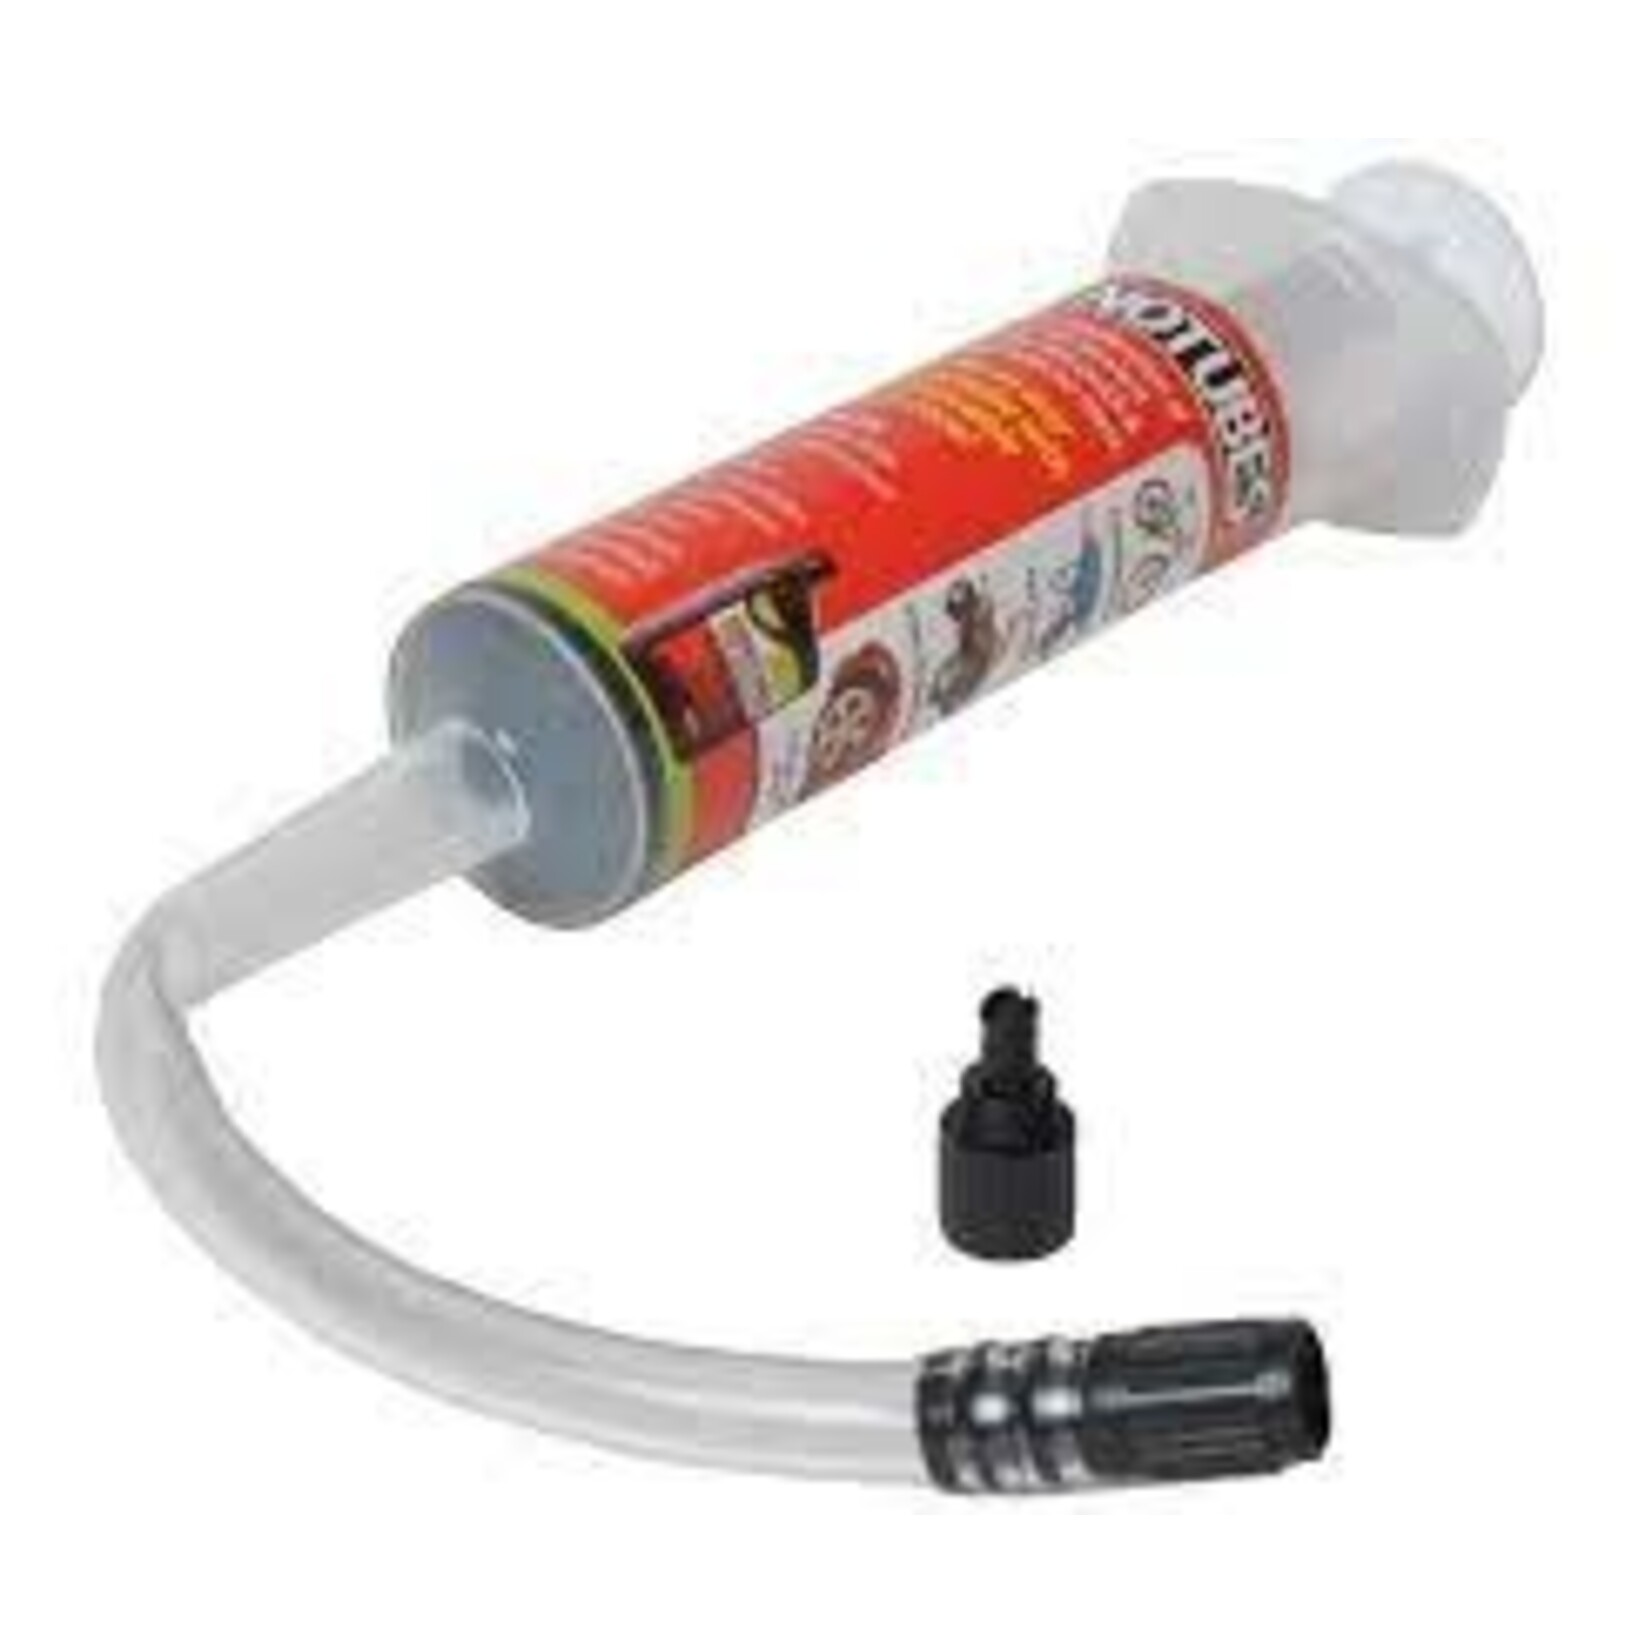 STANS Stan's N Tubes, Tire sealant injector